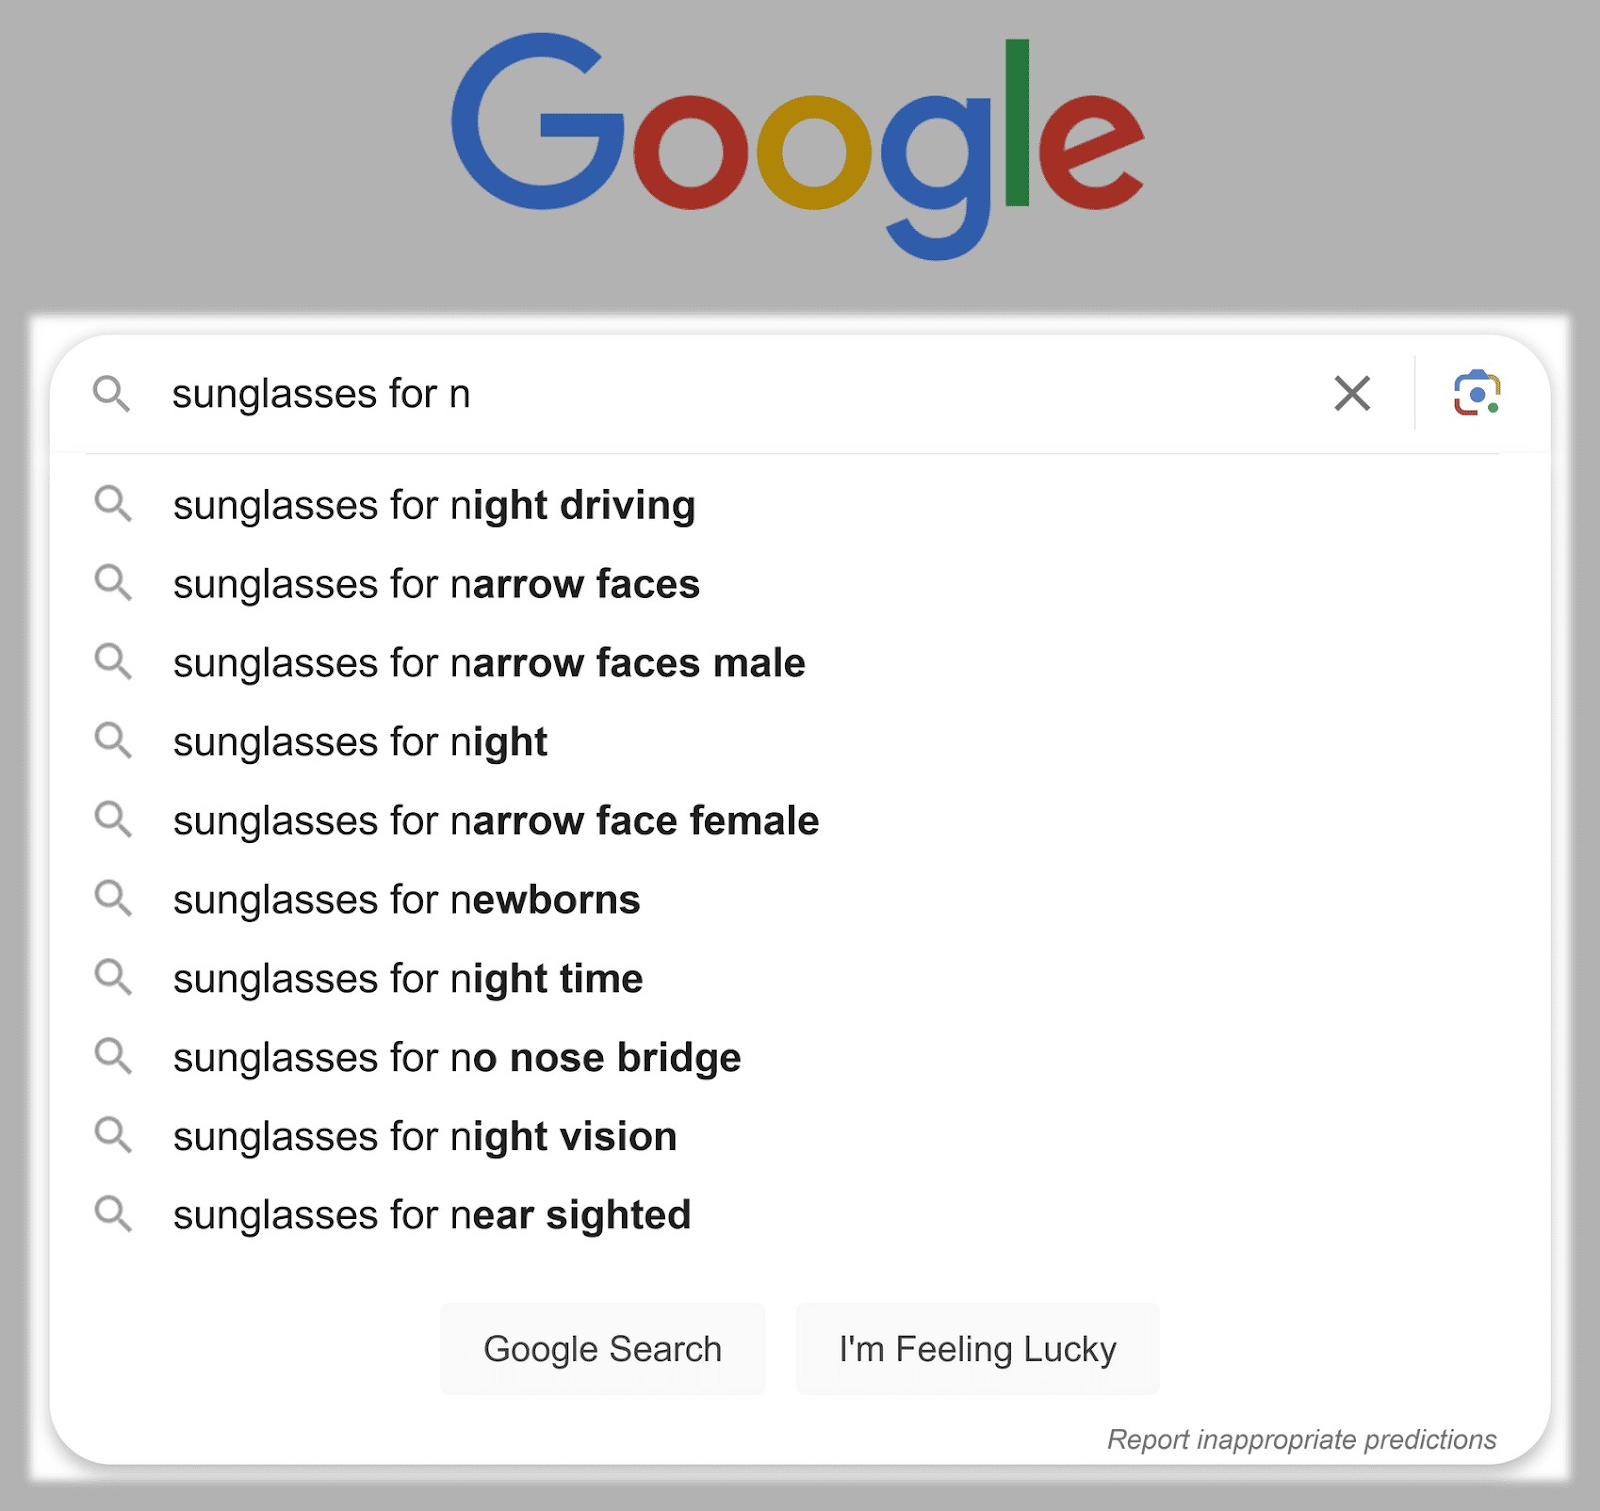 Google autocomplete suggestions when typing “sunglasses for n” into the search bar